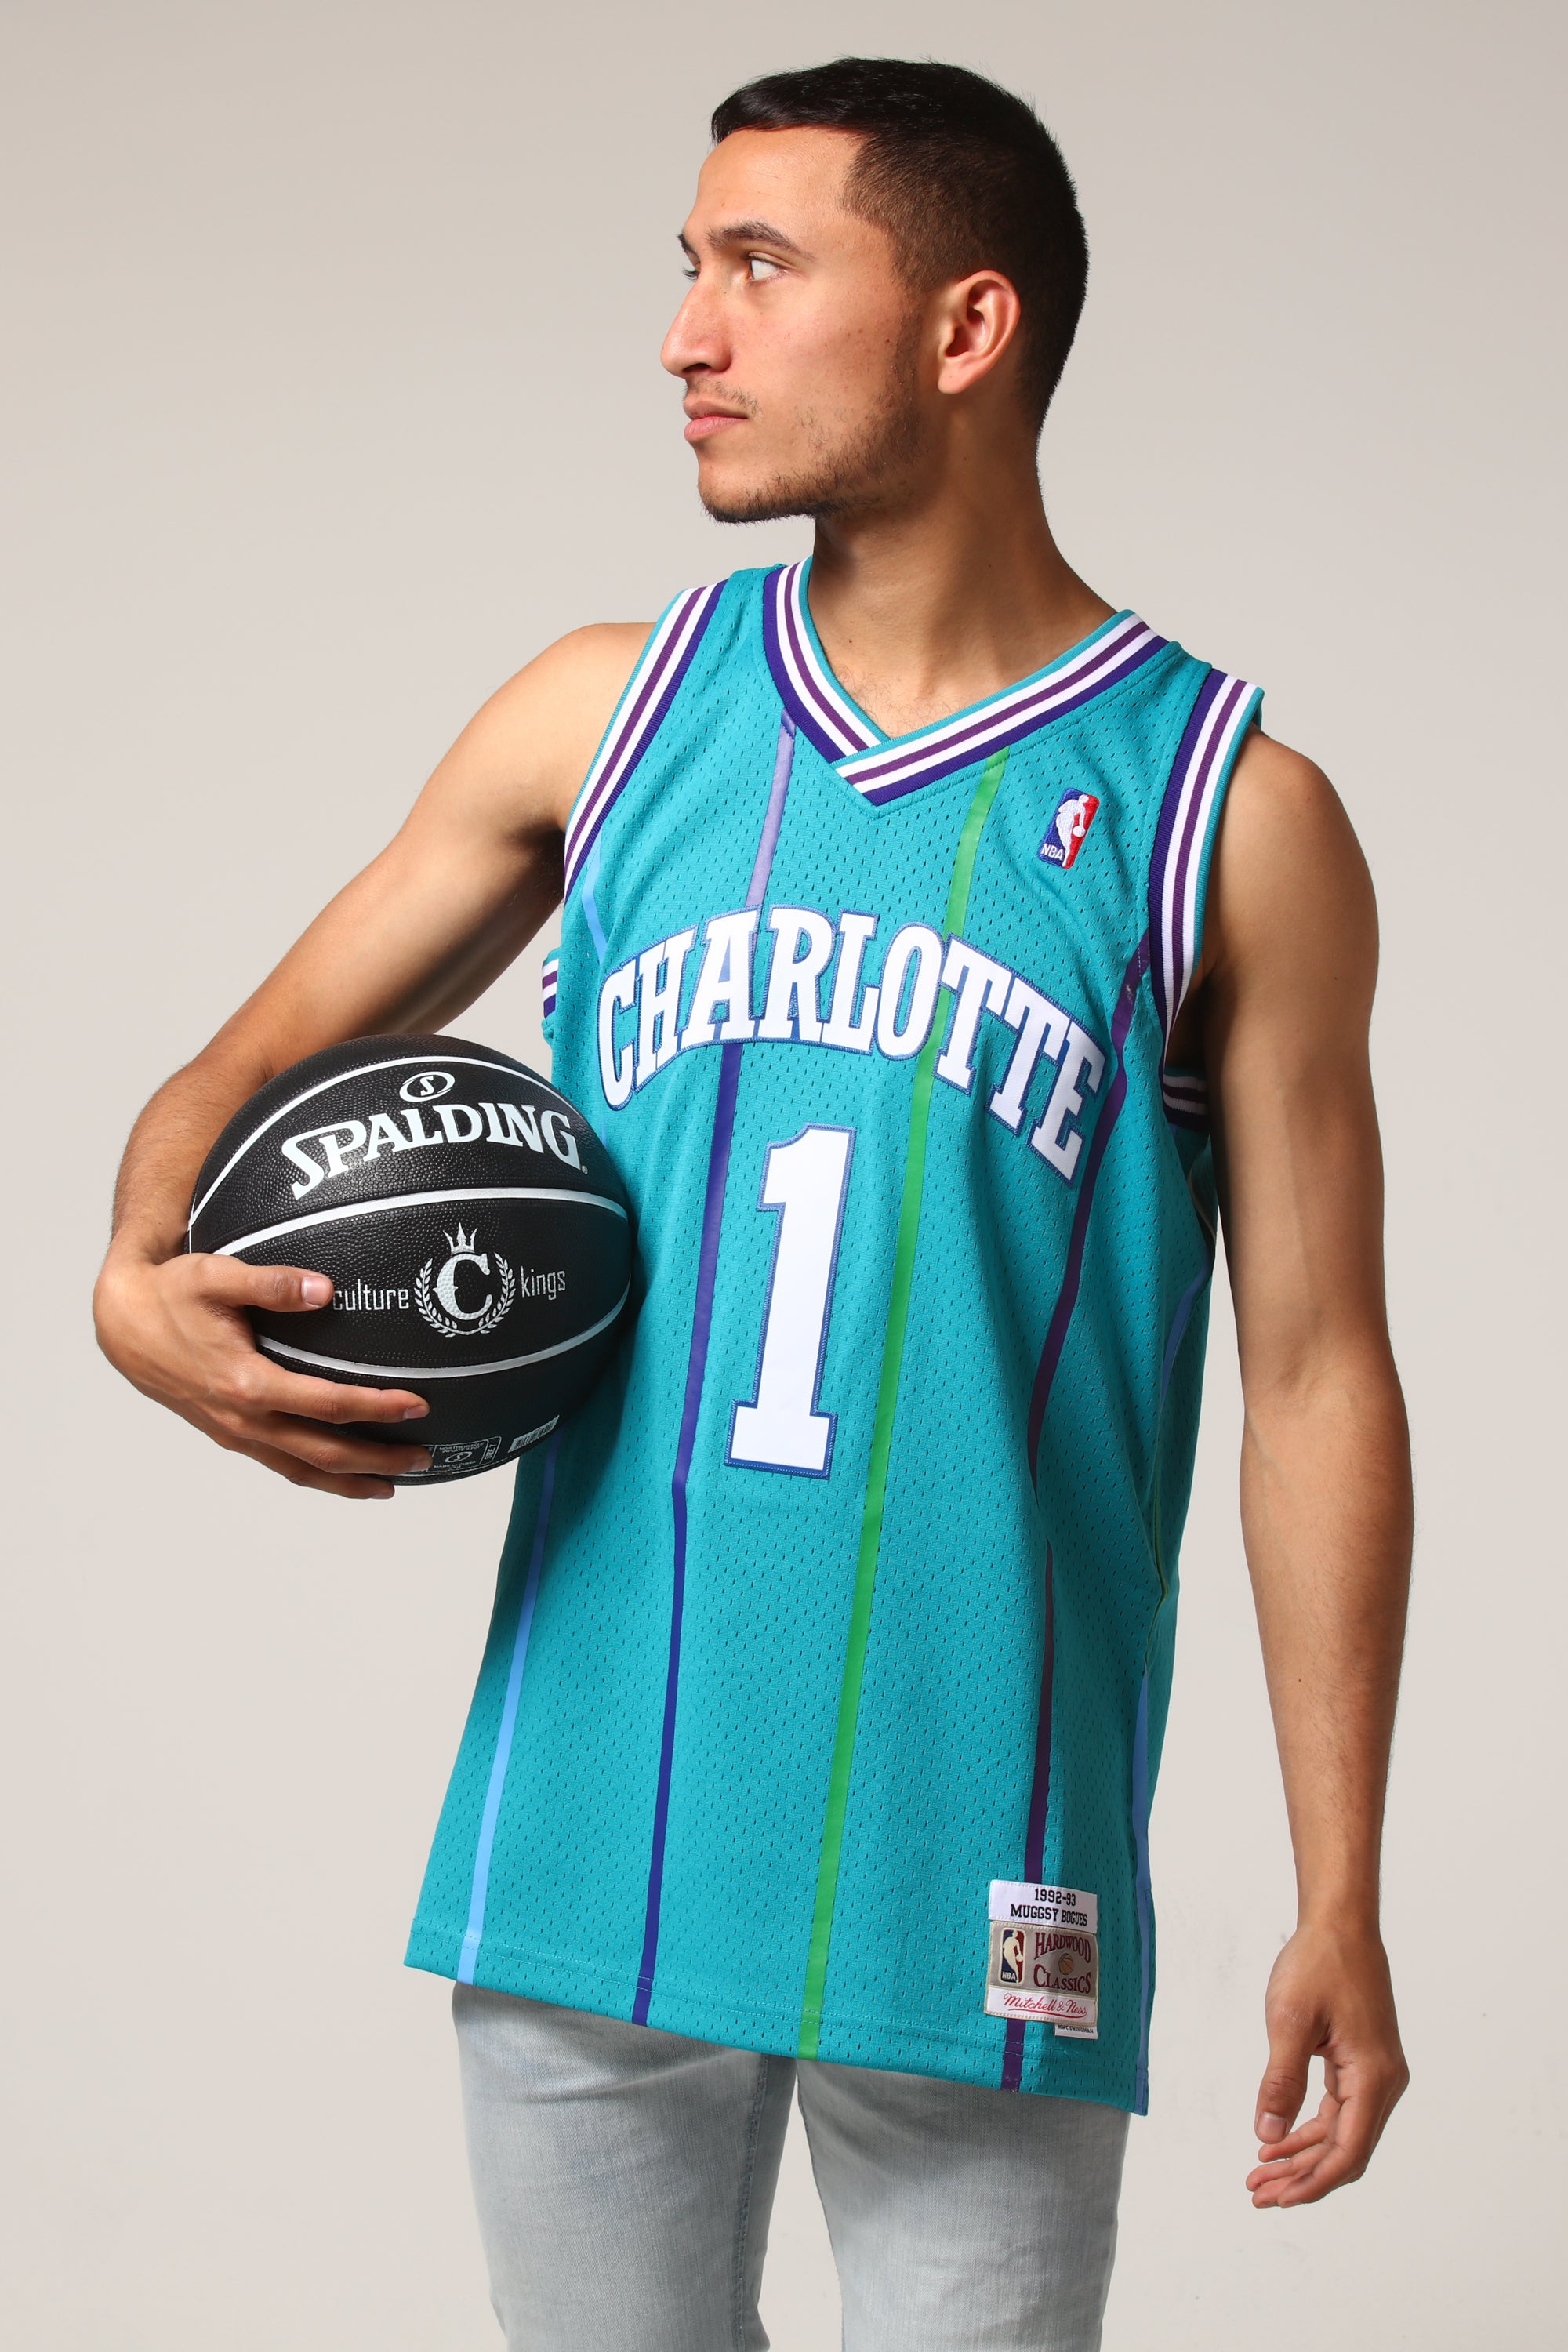 youth muggsy bogues jersey